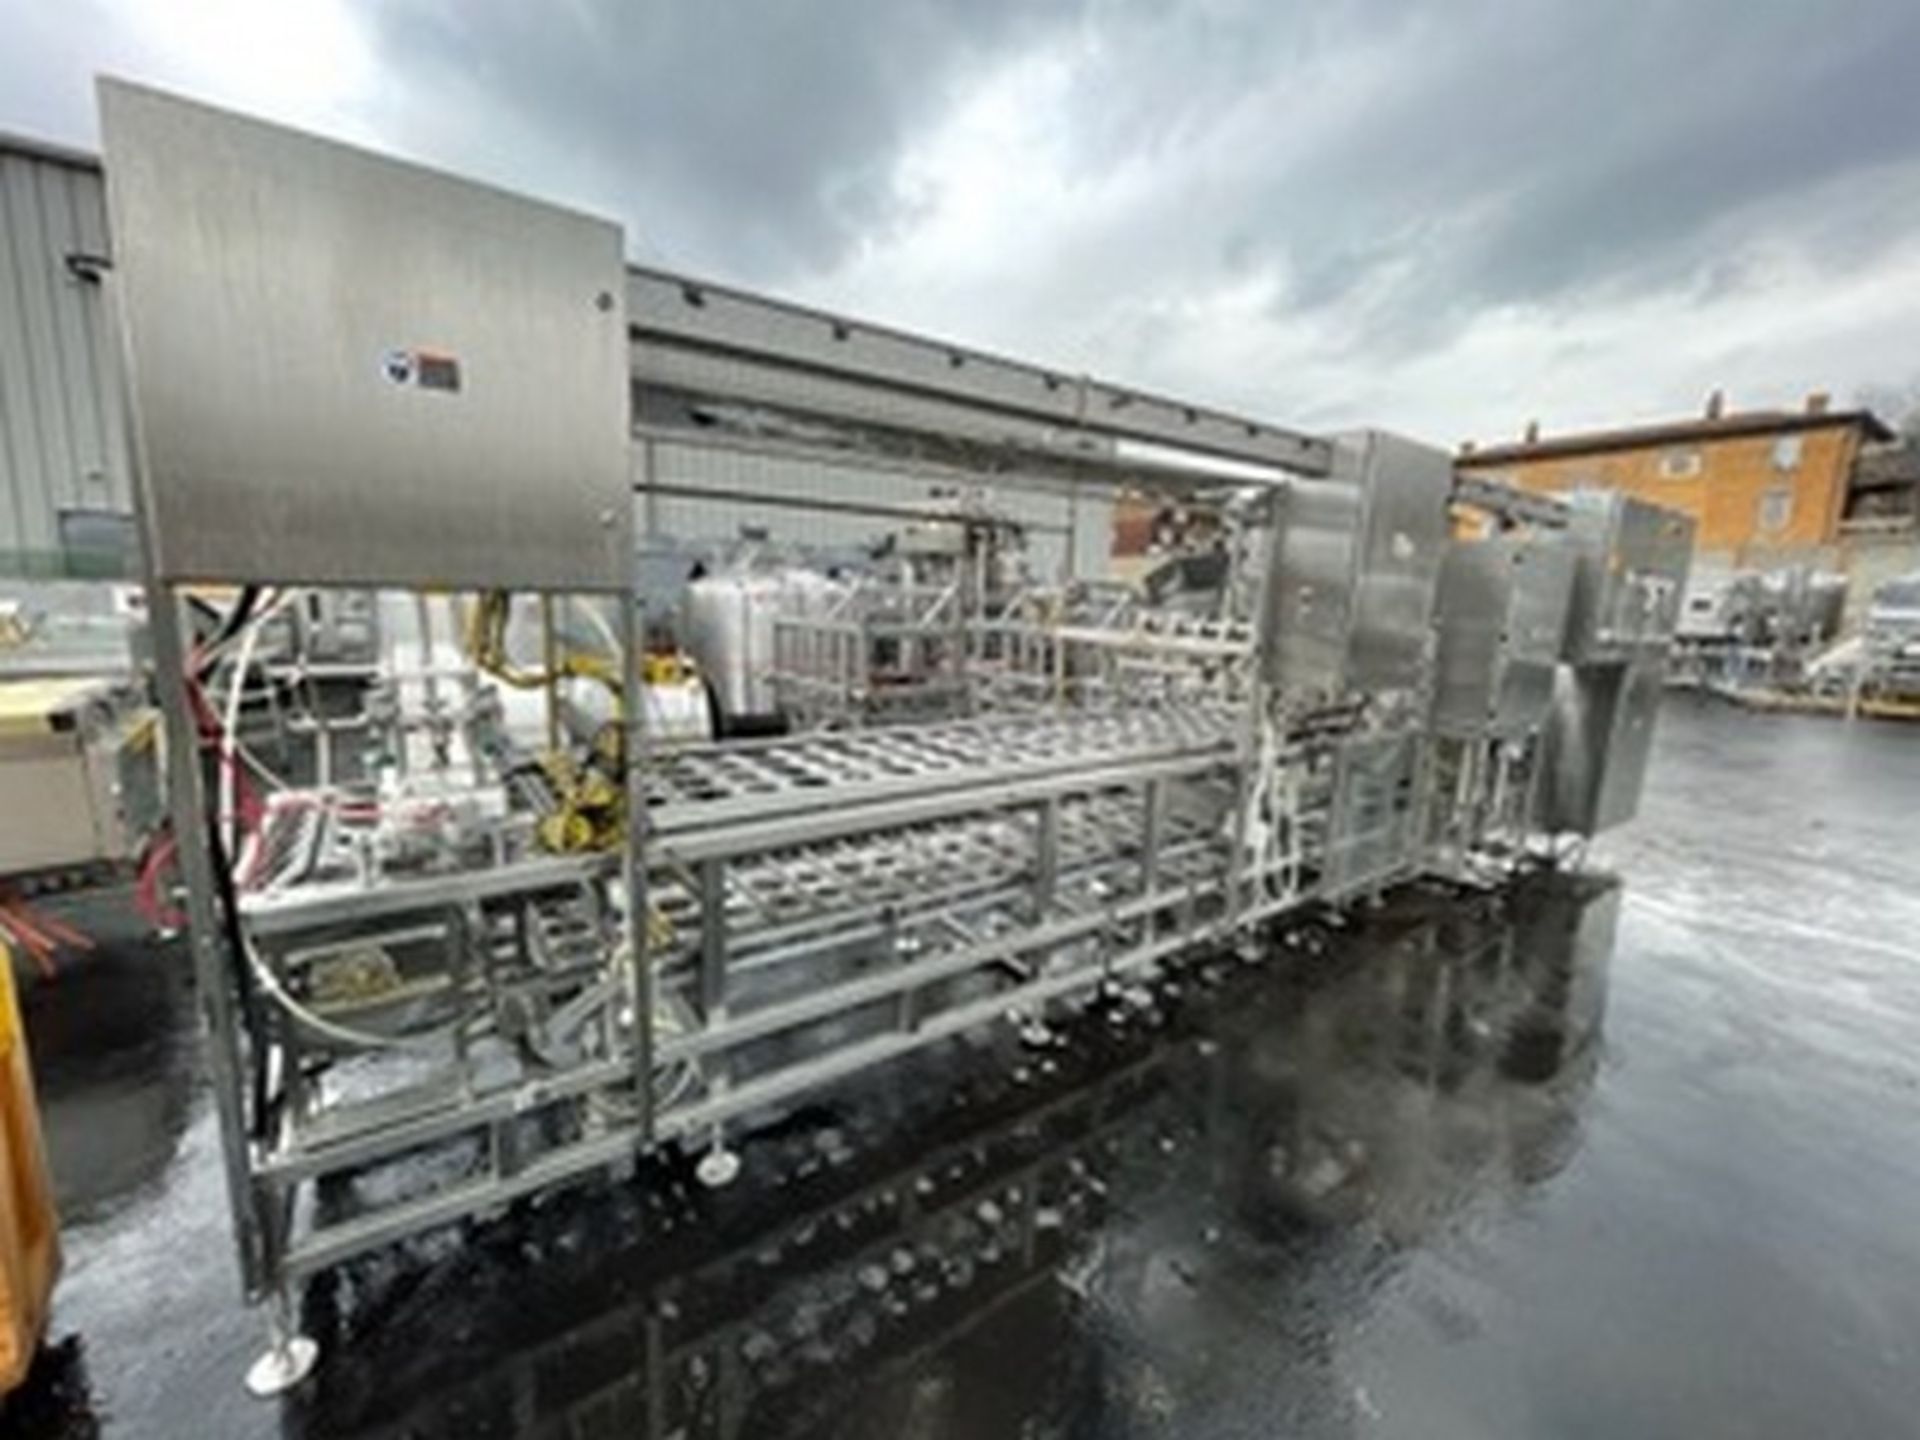 Osgood 4-Lane In-Line S/S Cup Filler,M/N 4800-E, S/N 351-840, Set Up with 3-5/8" W On-Board Change - Image 3 of 18